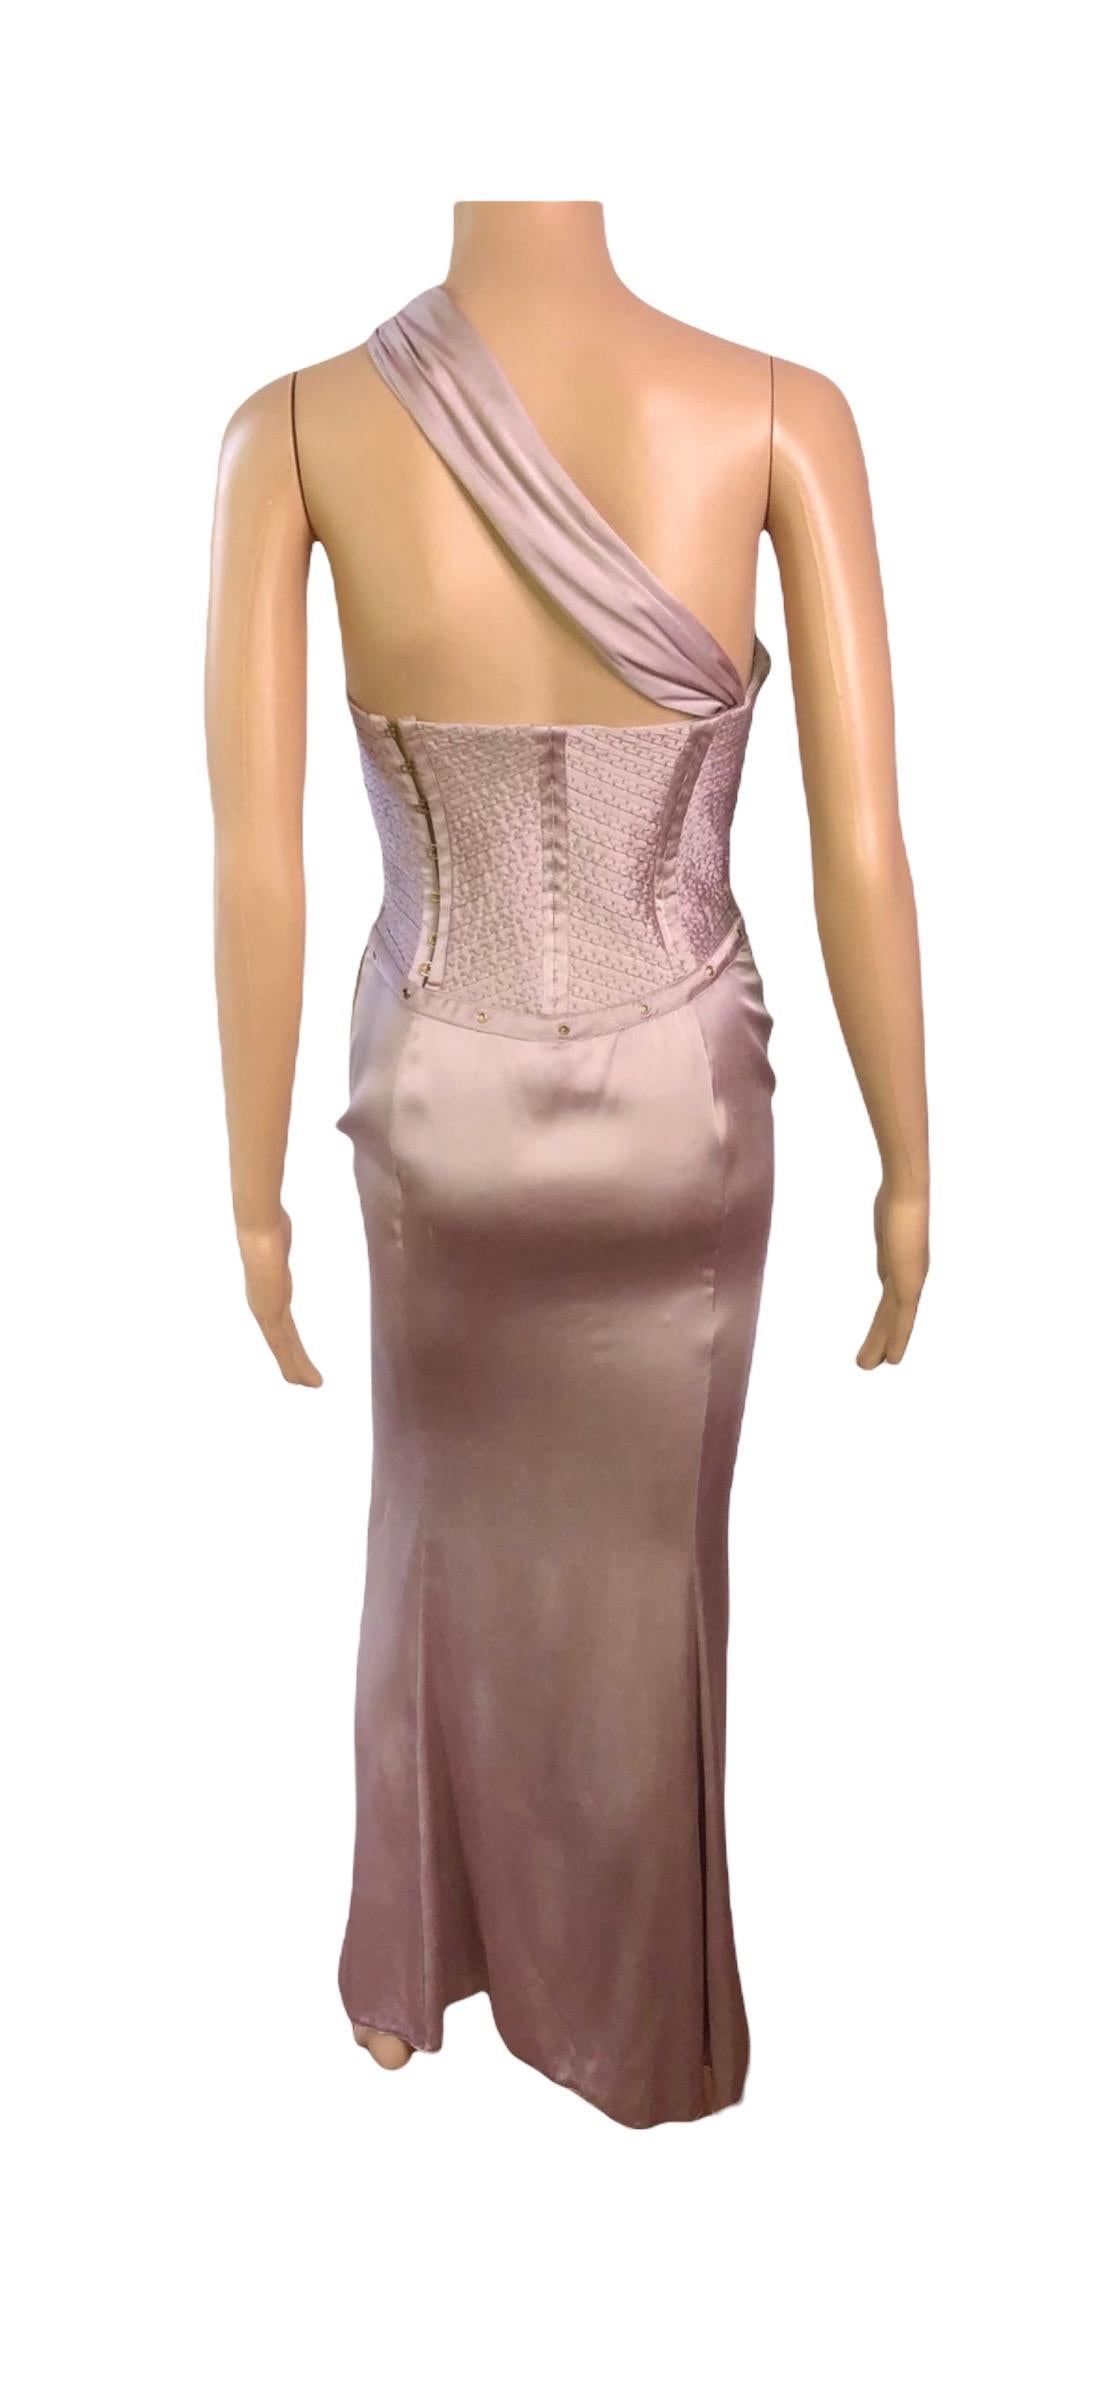 Tom Ford for Gucci F/W 2003 Runway Bustier Corset Silk Evening Dress Gown 3